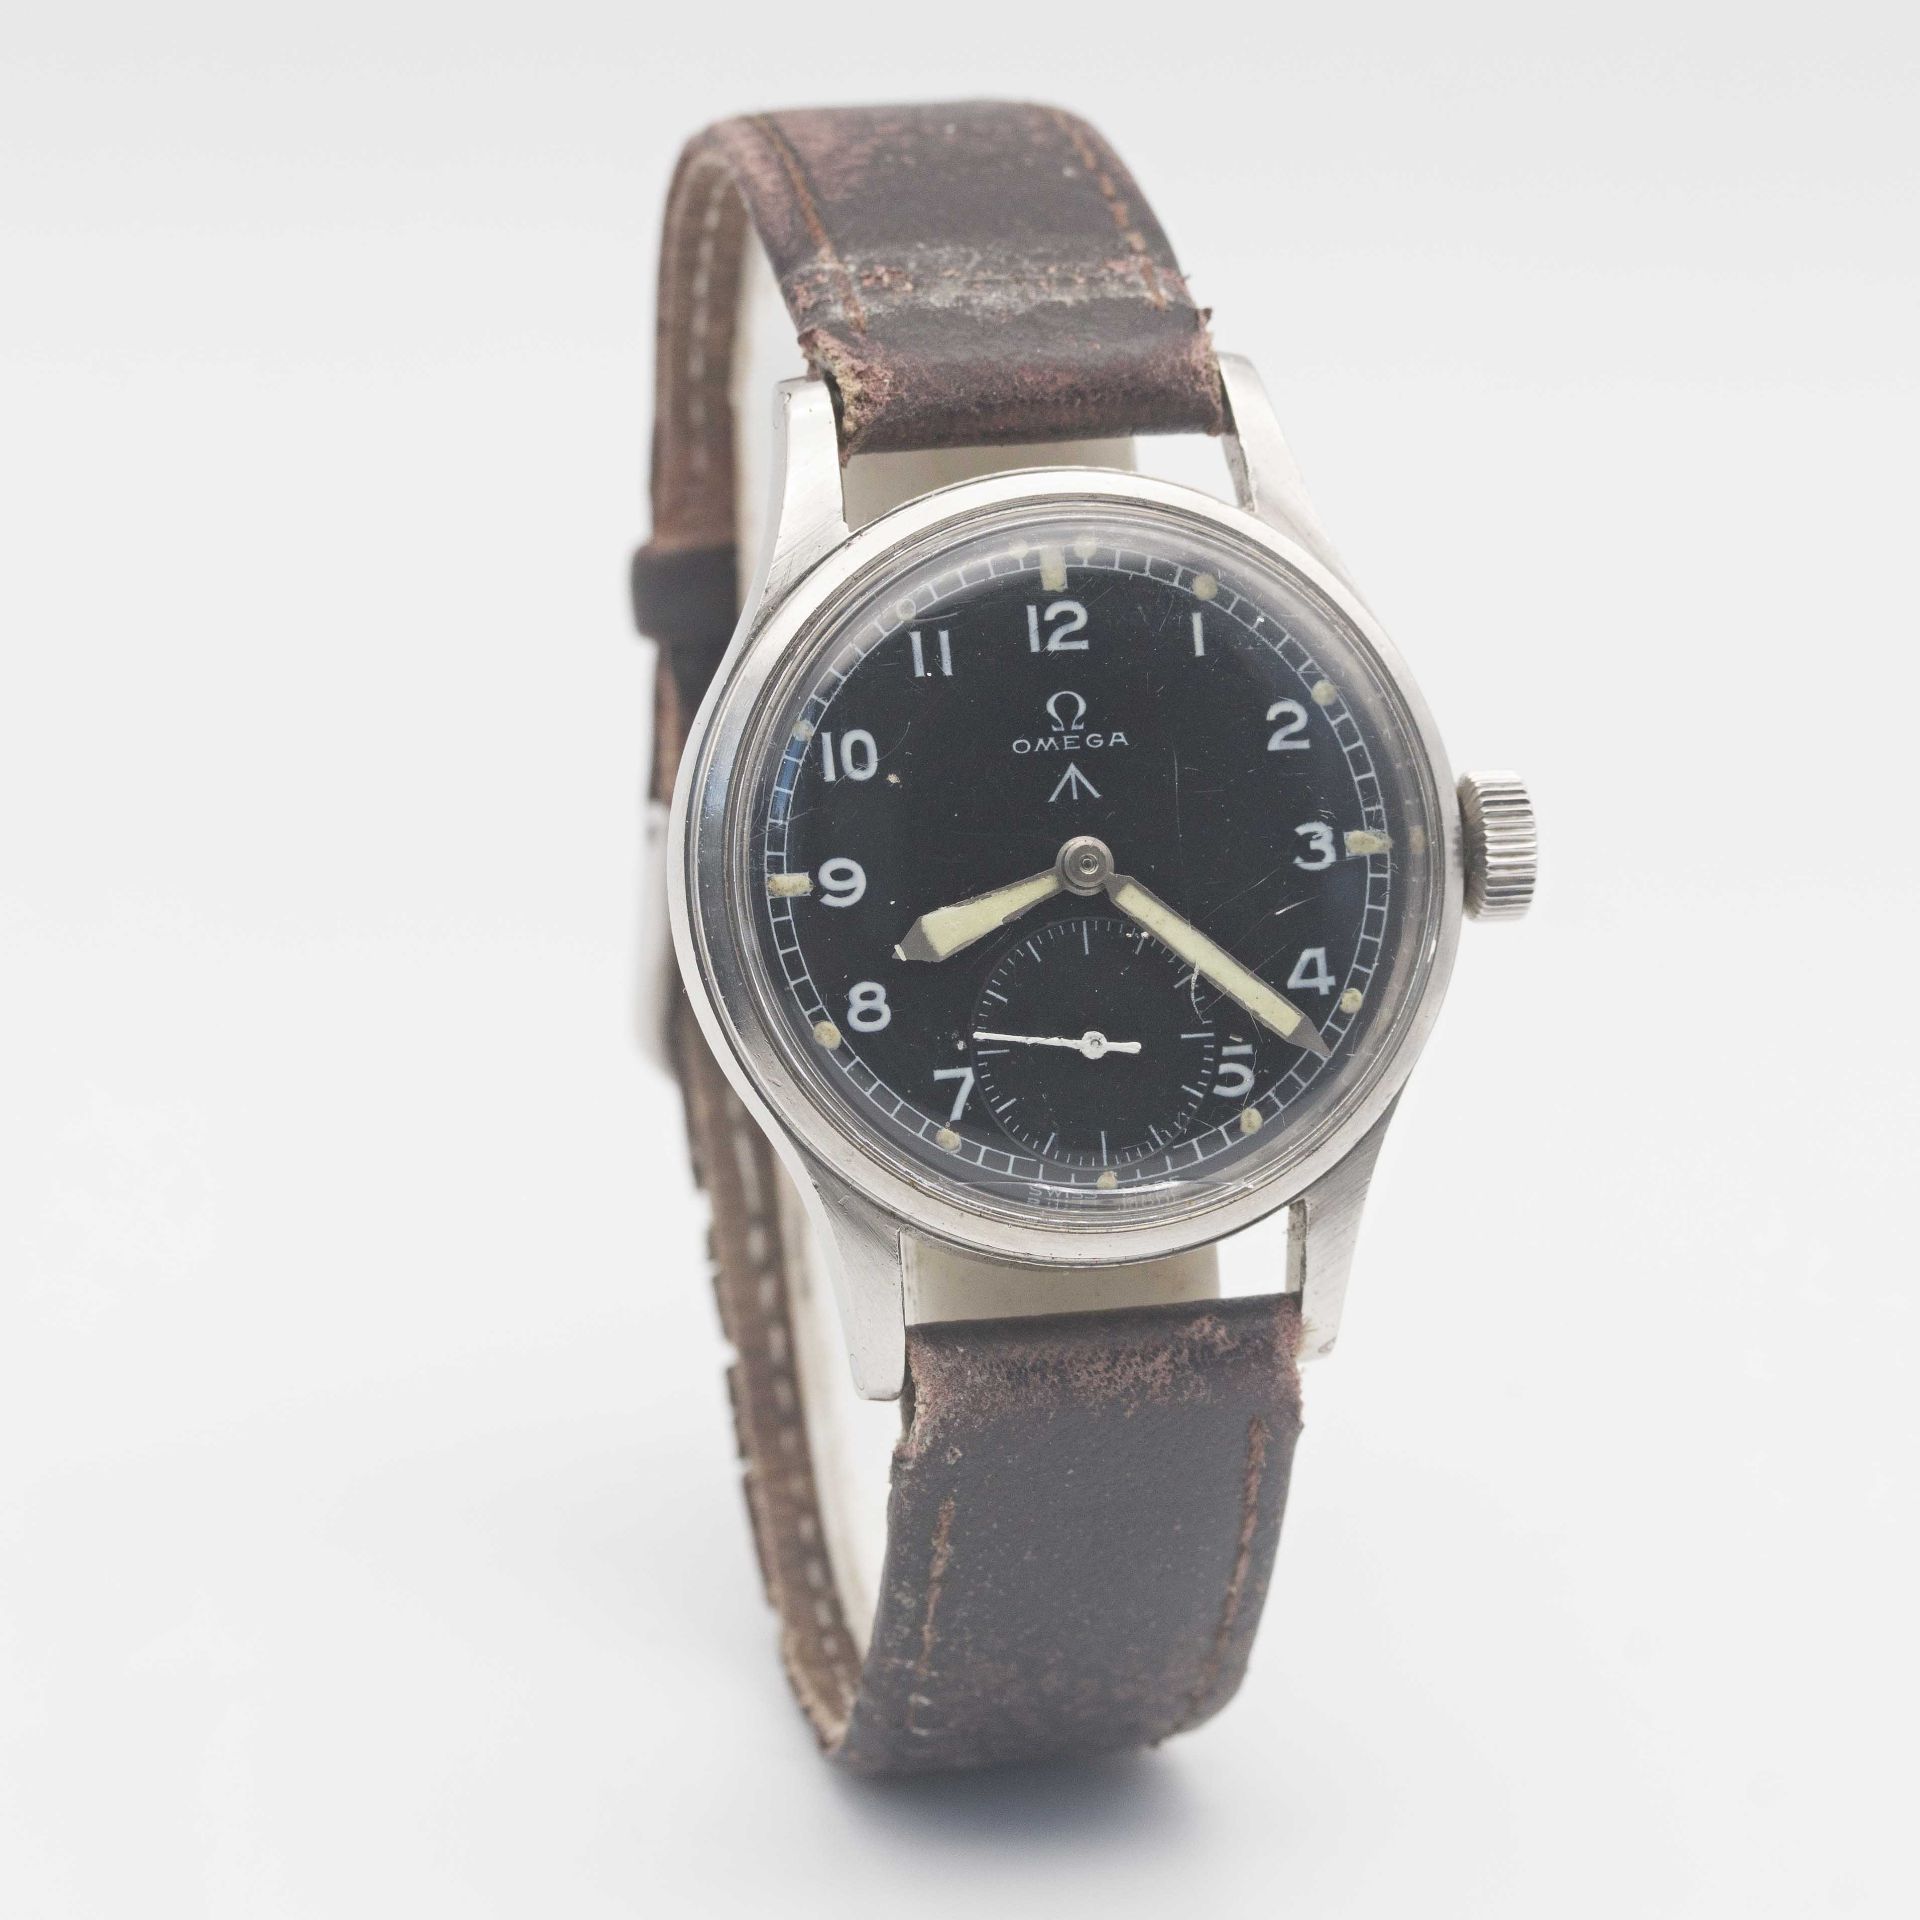 A GENTLEMAN'S STAINLESS STEEL BRITISH MILITARY OMEGA W.W.W. WRIST WATCH CIRCA 1945, PART OF THE " - Image 5 of 9